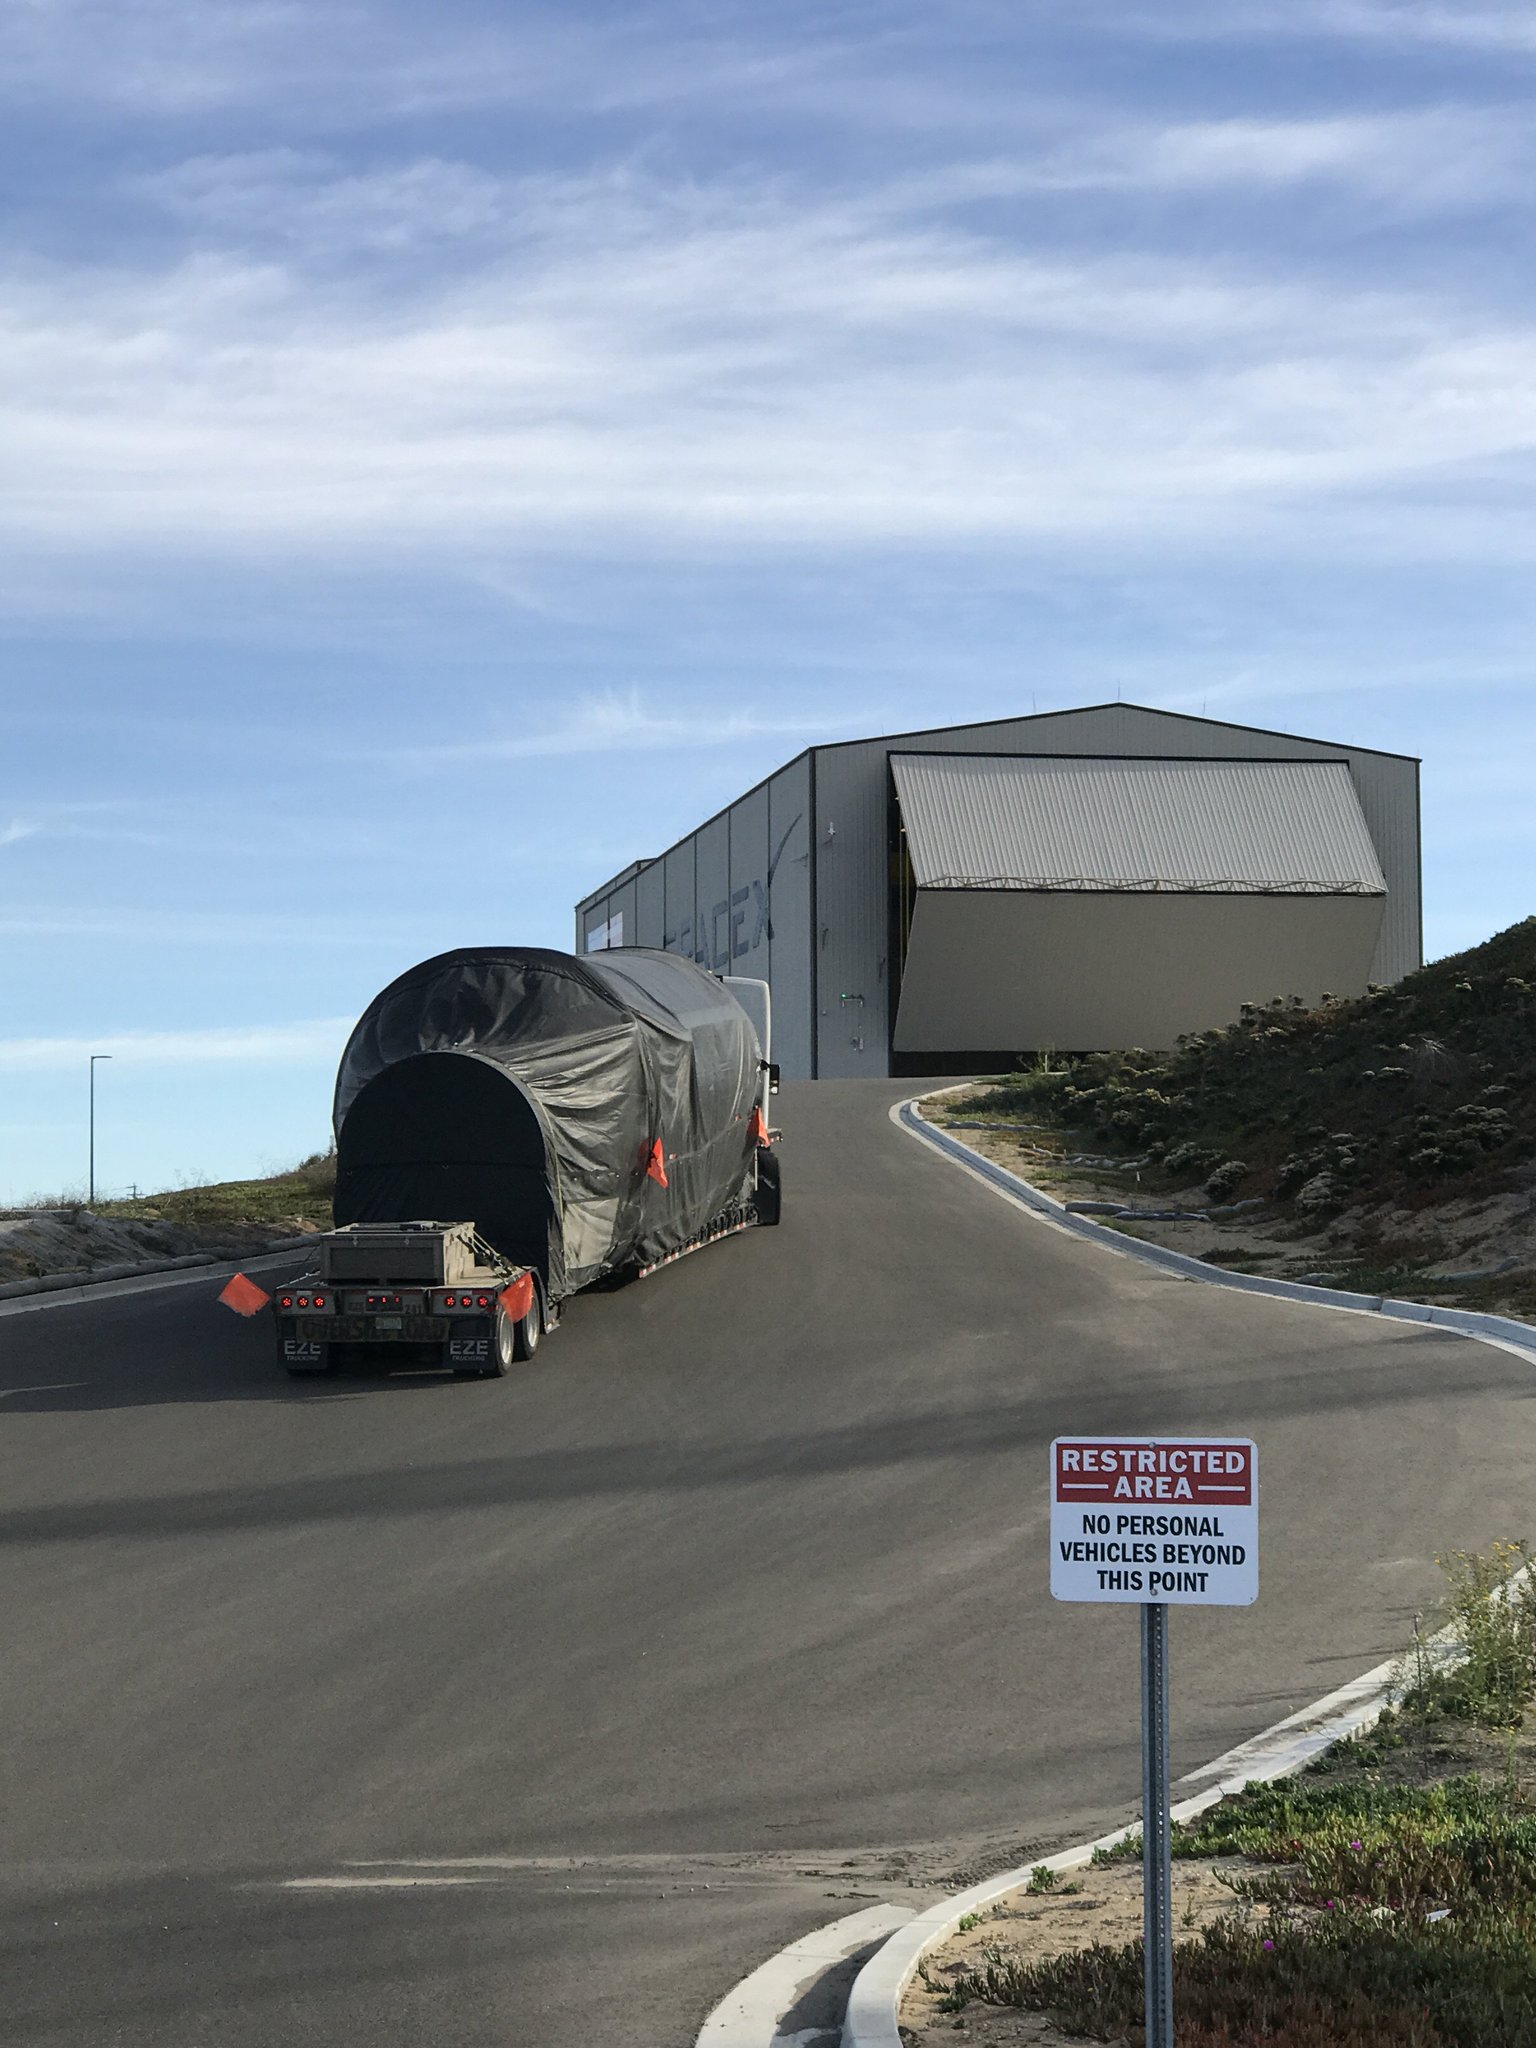 SpaceX Falcon 9 second stage 1 arriving at Vandenberg AFB in California in early November 2016 for Iridium NEXT launch. Credit: SpaceX/Iridium